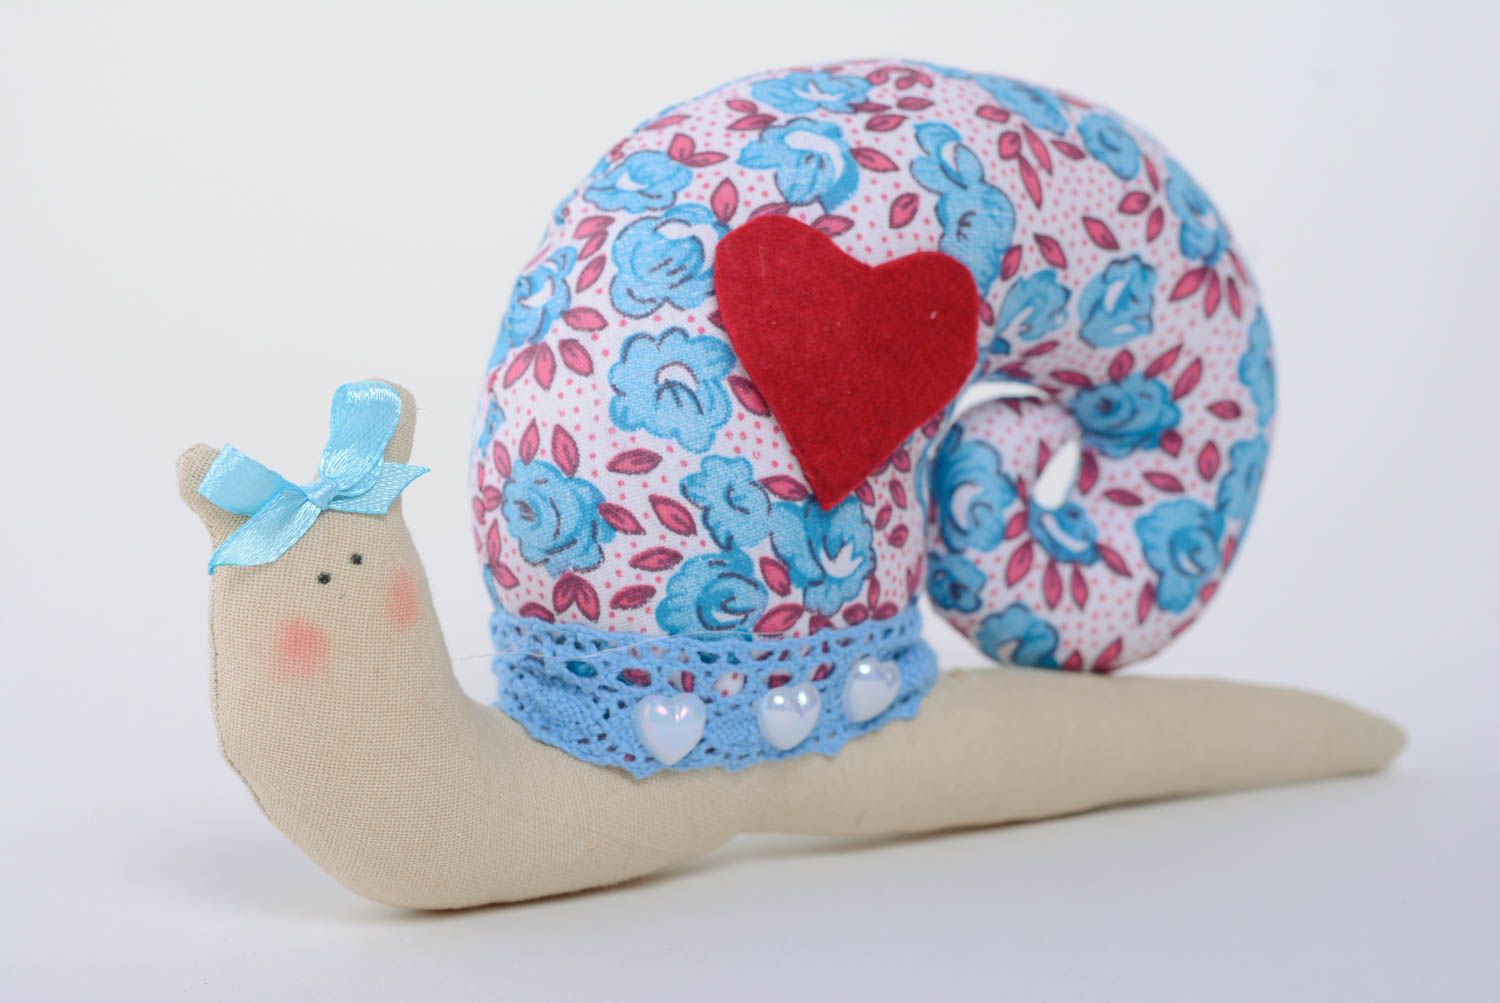 Handmade snail toy for home decor made of cotton decorative blue interior toy photo 1